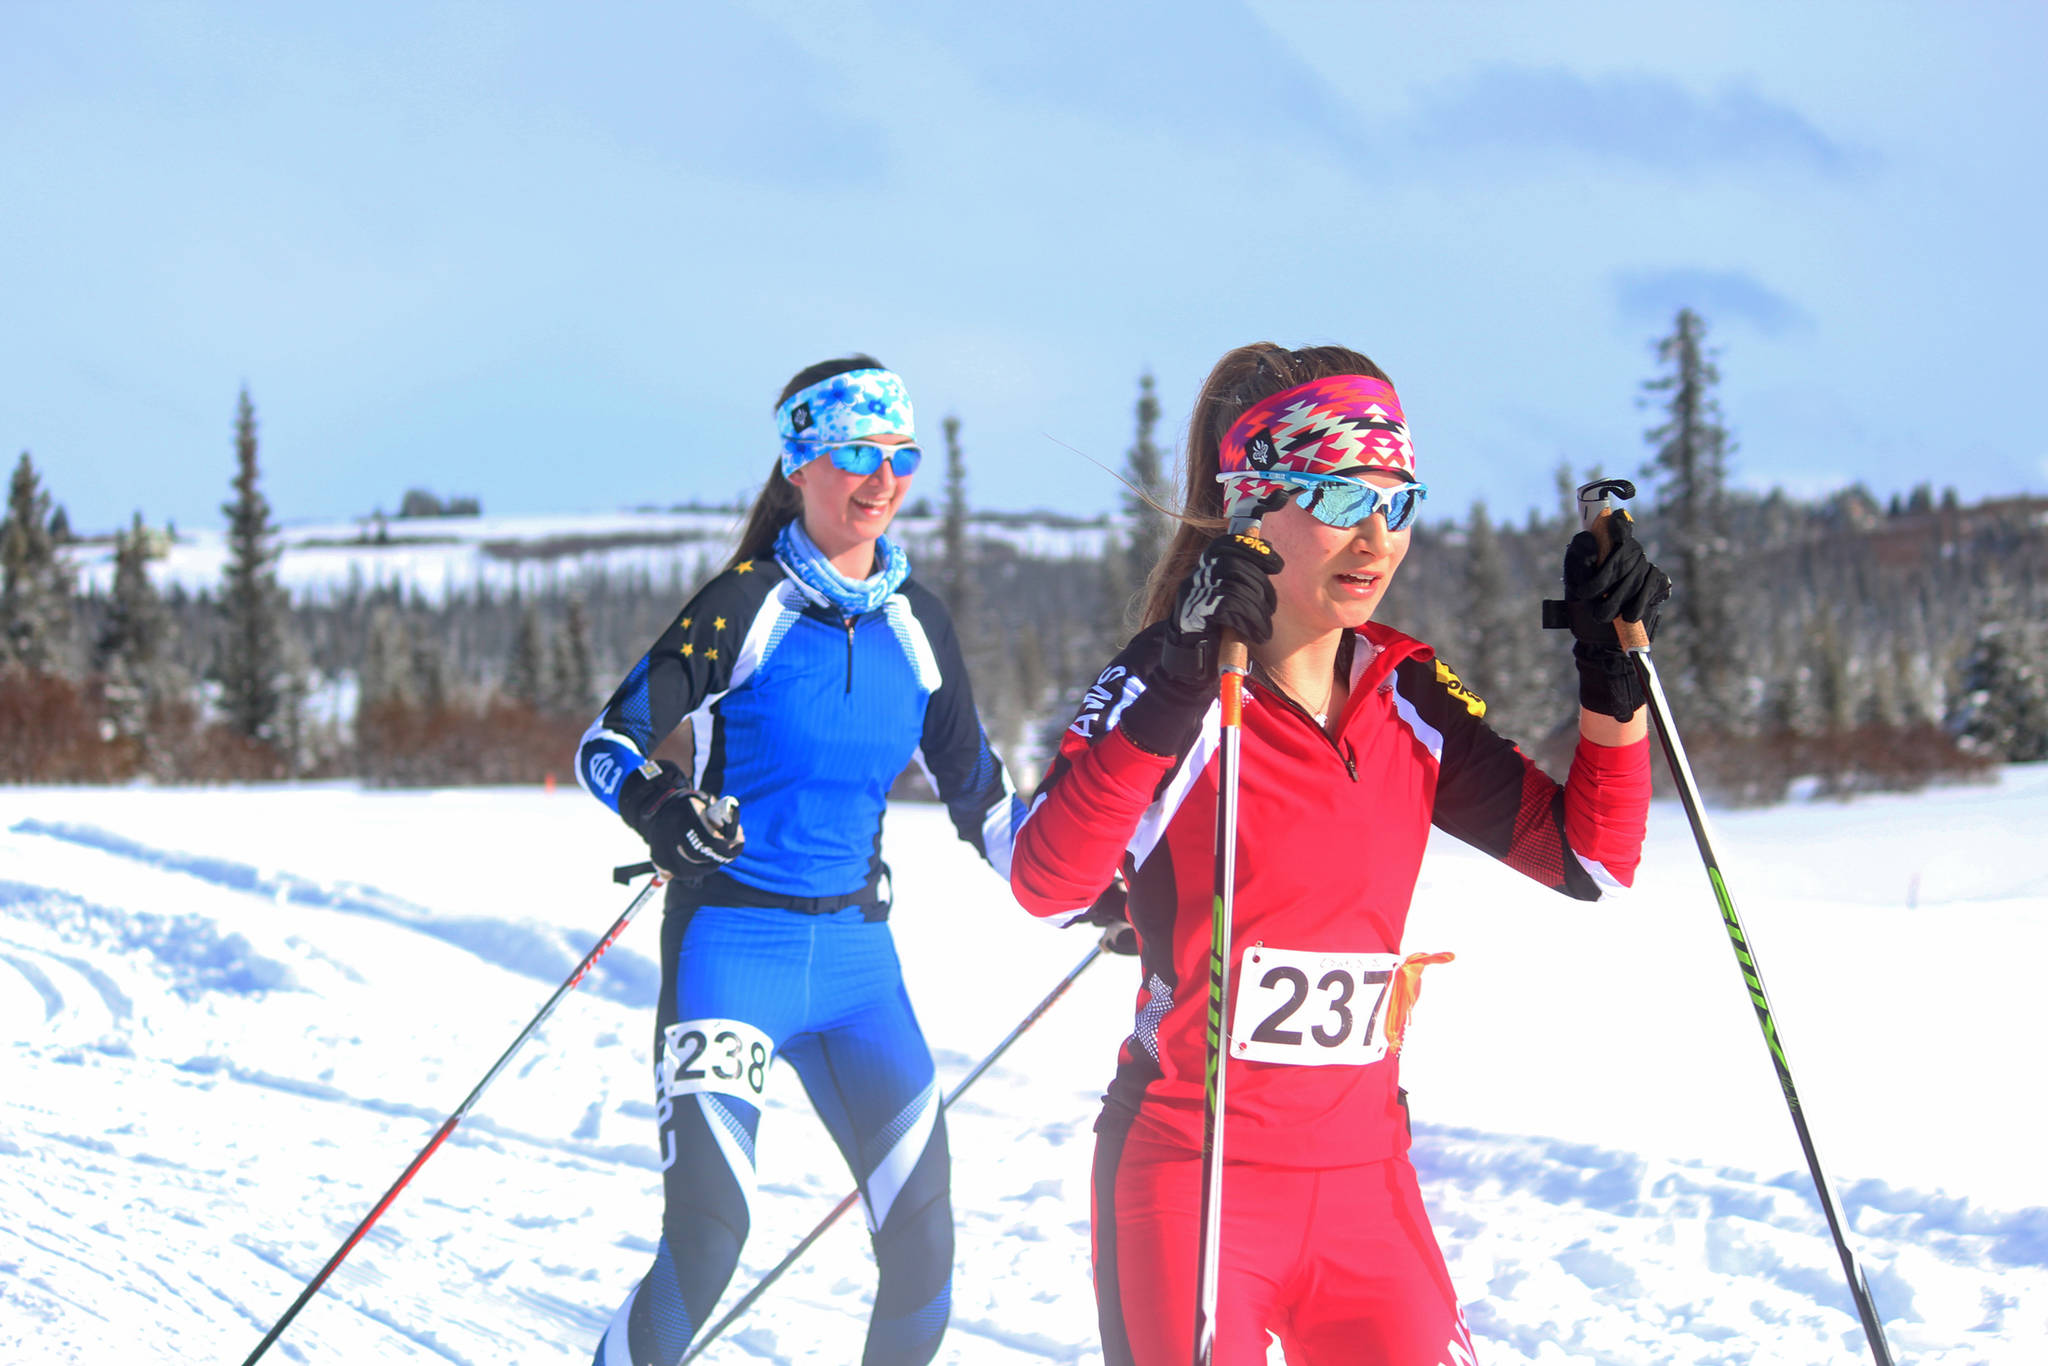 South Anchorage High School students Sadie Oswald, red, and Abby Amick, blue, cross the finish line of the Kachemak Bay Nordic Ski Marathon’s 25 Kilometer race Saturday, March 10, 2018 as the first women across the finish line at the McNeil Canyon Ski Area outside Homer, Alaska. (Photo by Megan Pacer/Homer News)